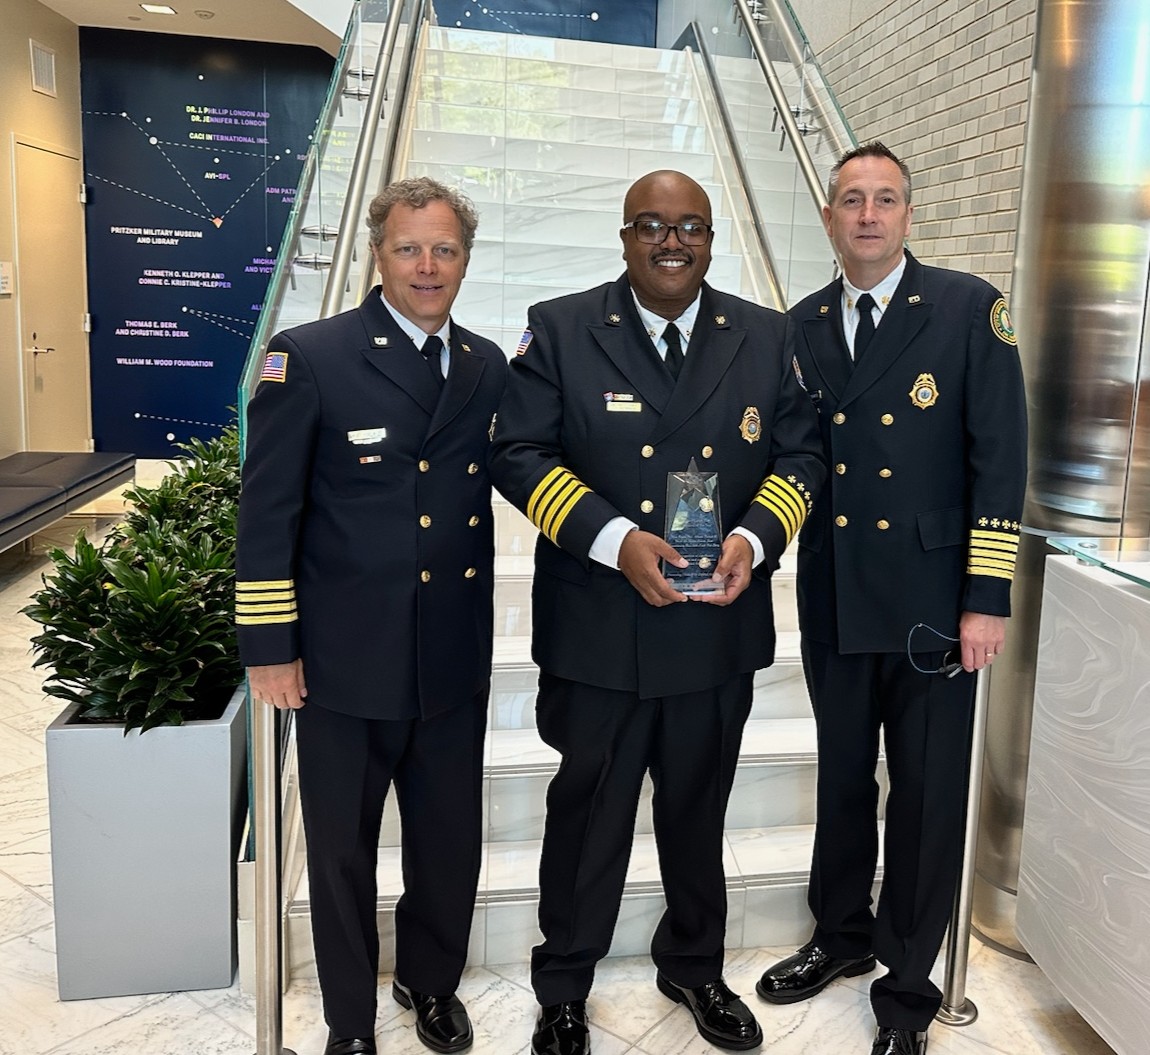 Chief Ken Pravetz & DC Vance Cooper had the pleasure of congratulating Chief Cedrick Patterson and  @cnrmafes on being recognized at the CNIC Large Fire Department of the Year Award! It is an honor to be a partner with you and serve our community. #communitypartners @USNavy